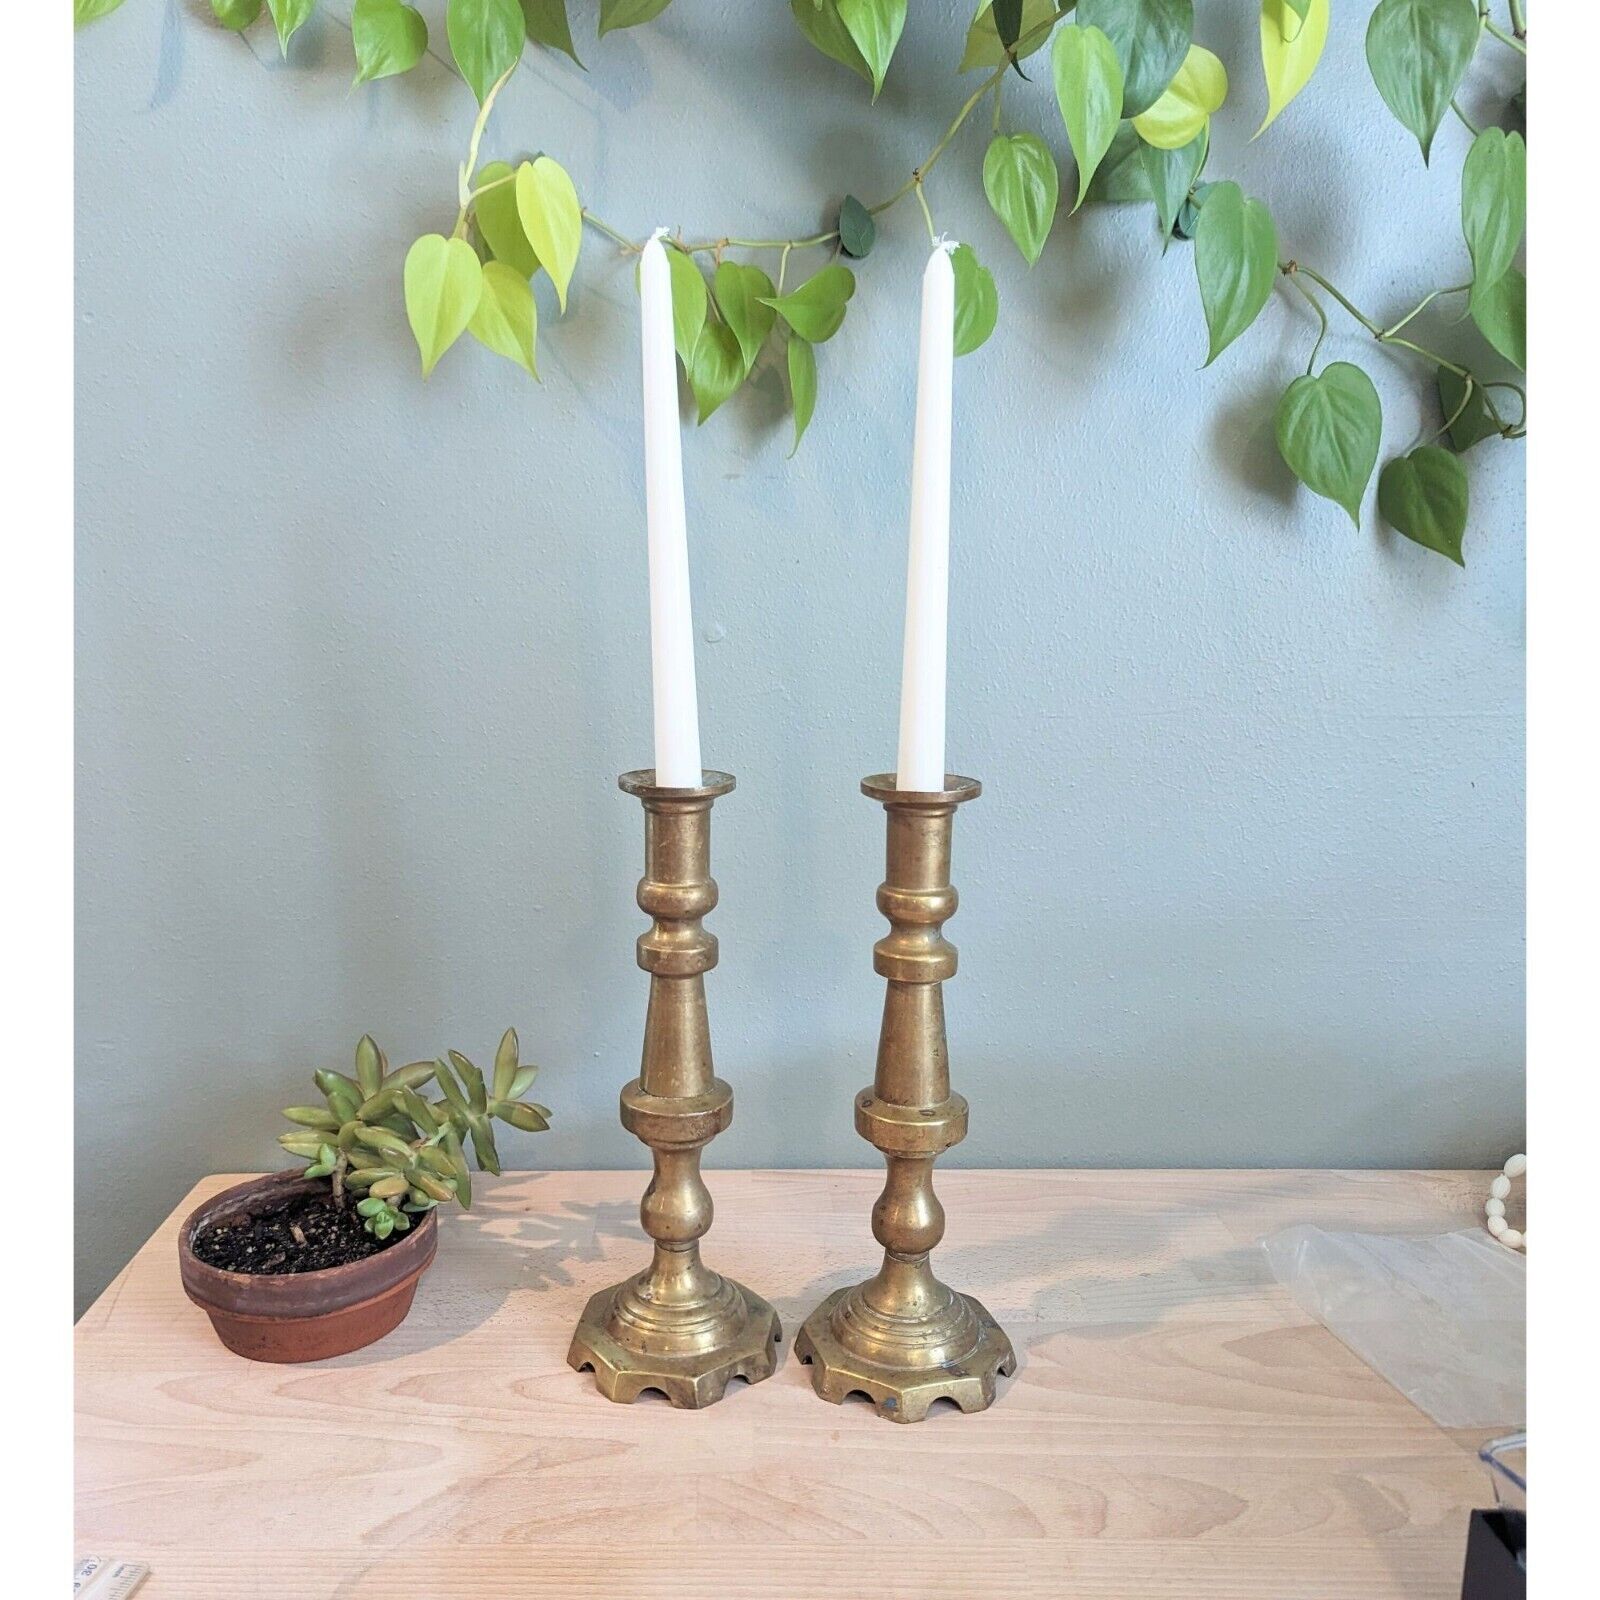 Set of 2 Vintage HEAVY Solid Brass Mexican Altar Candleholders Ornate Large